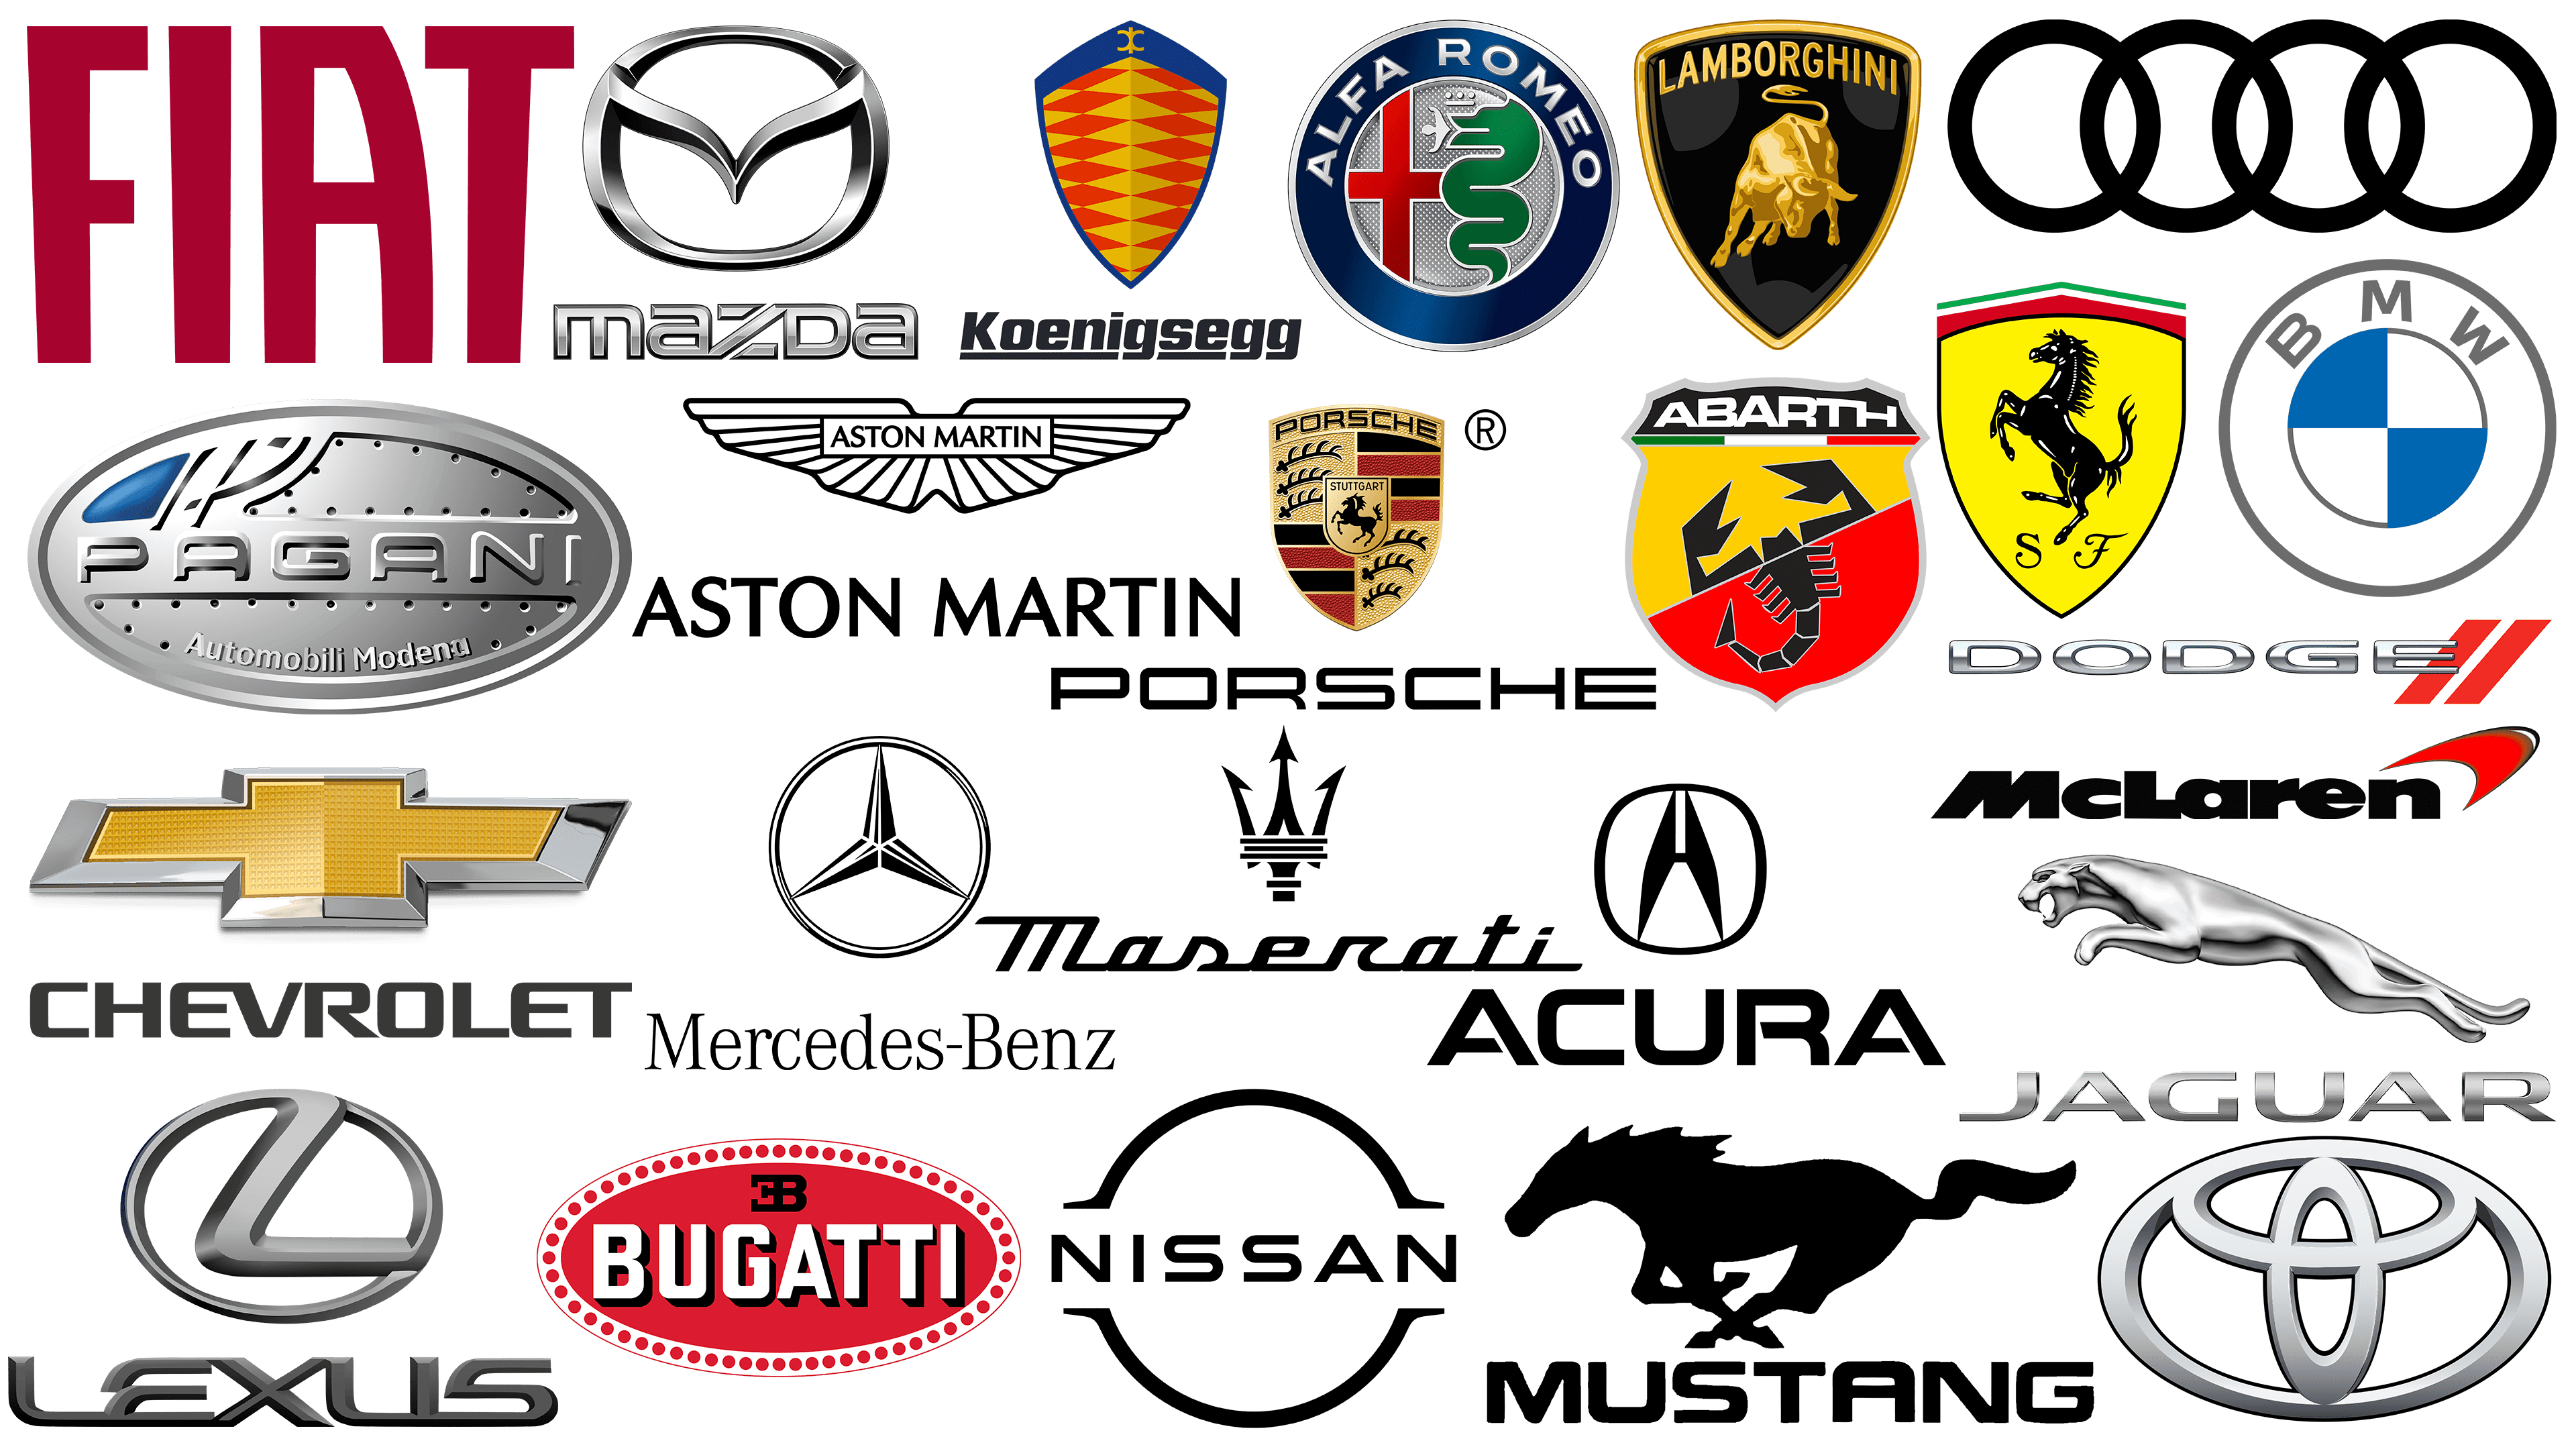 The most famous logos of sports and high performance cars